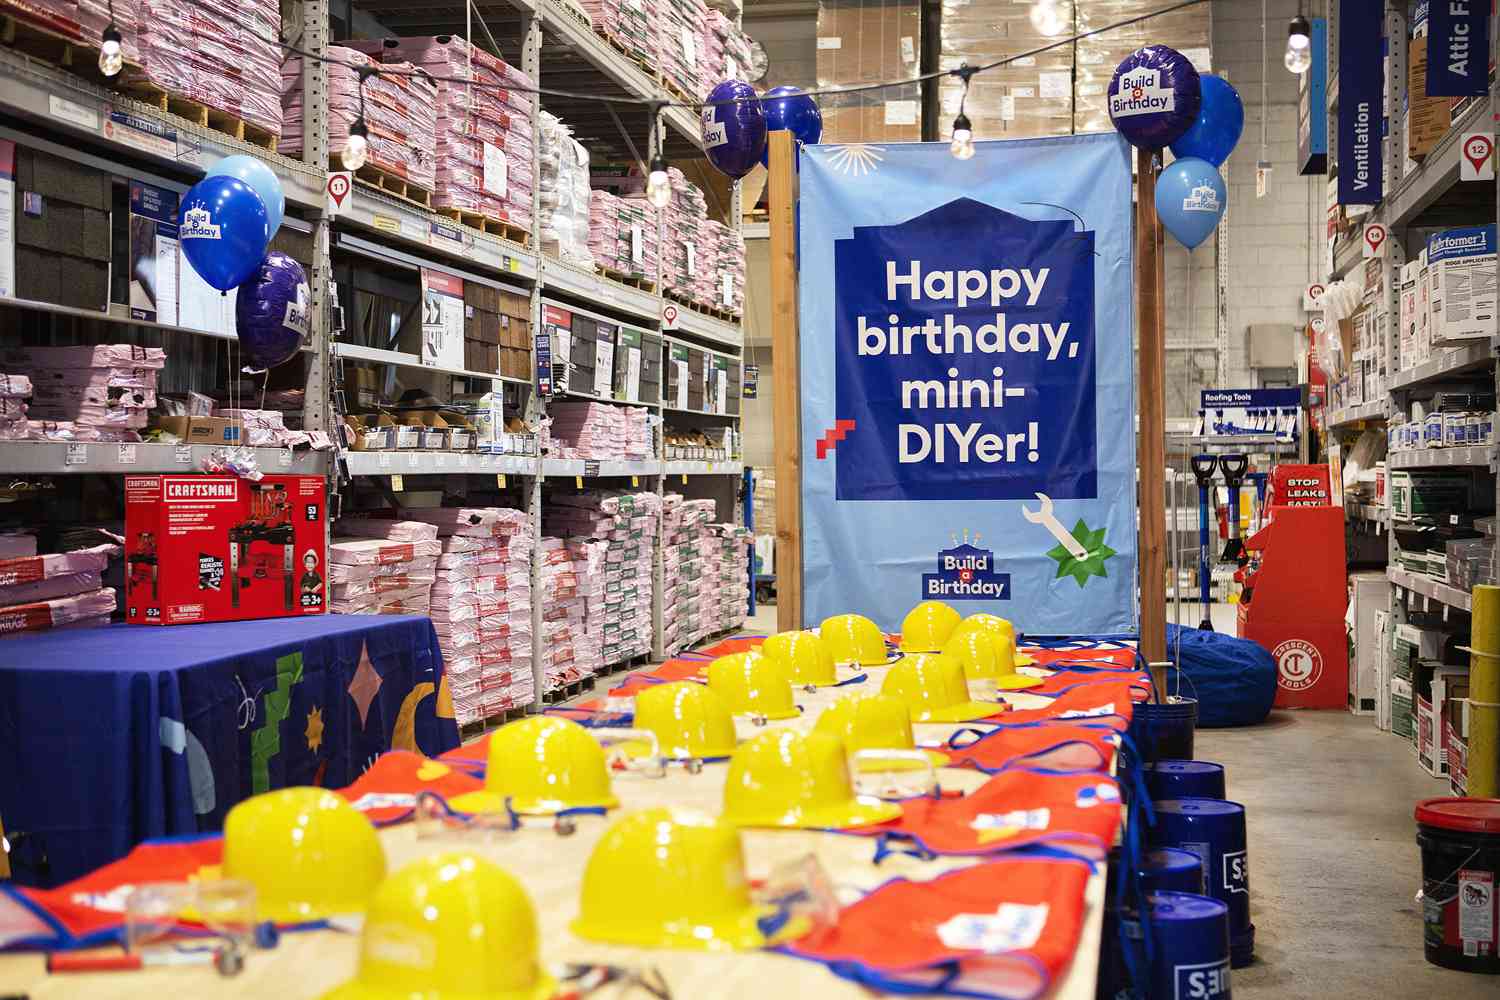 Lowe's New 'Build a Birthday' Party Kits 